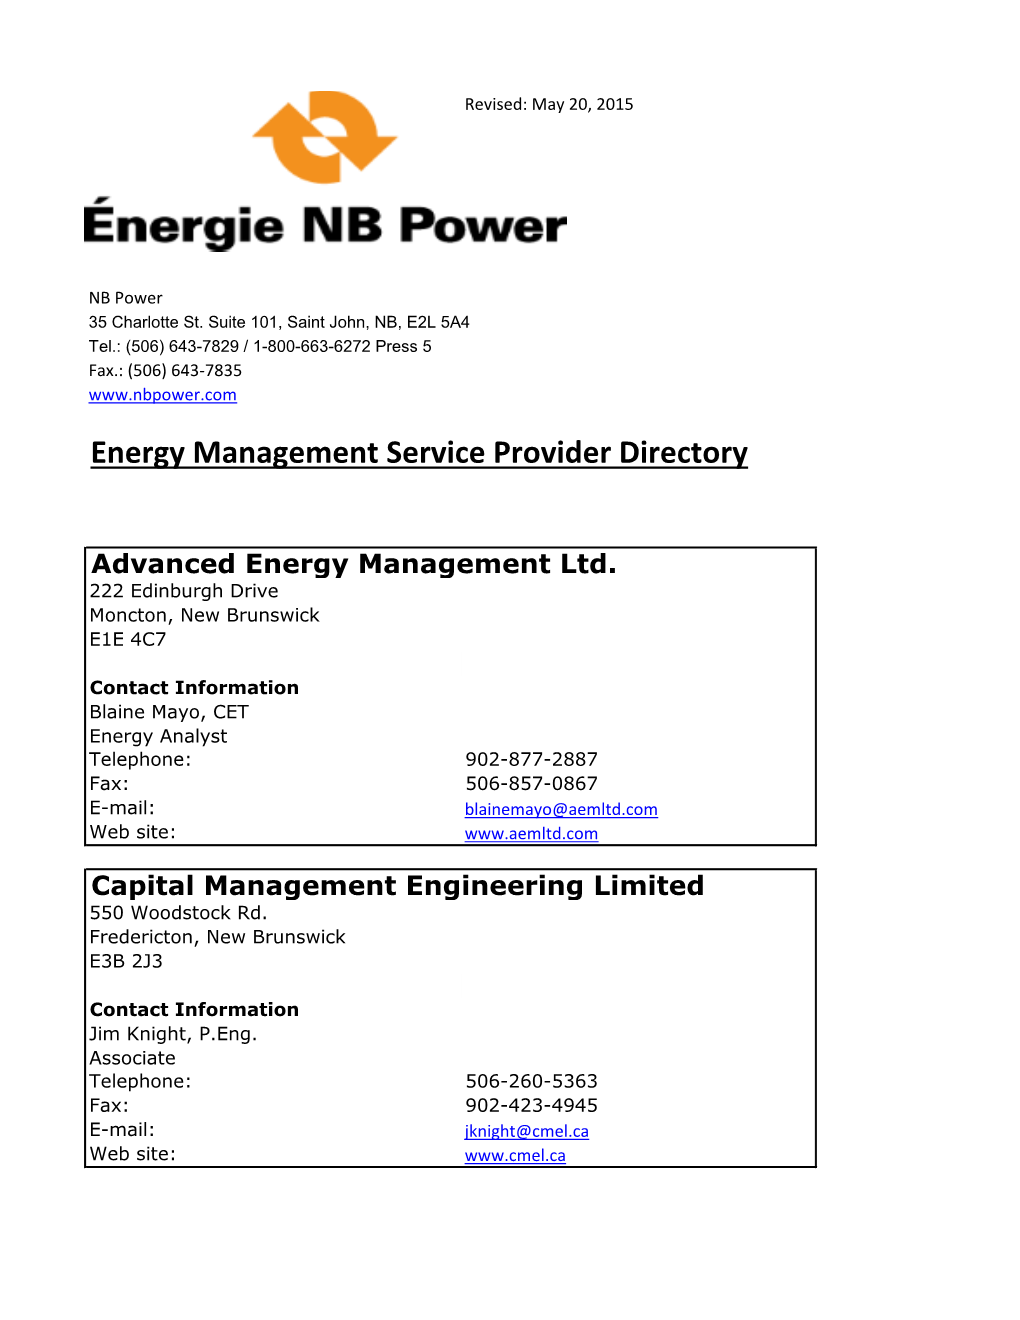 Energy Management Service Provider Directory